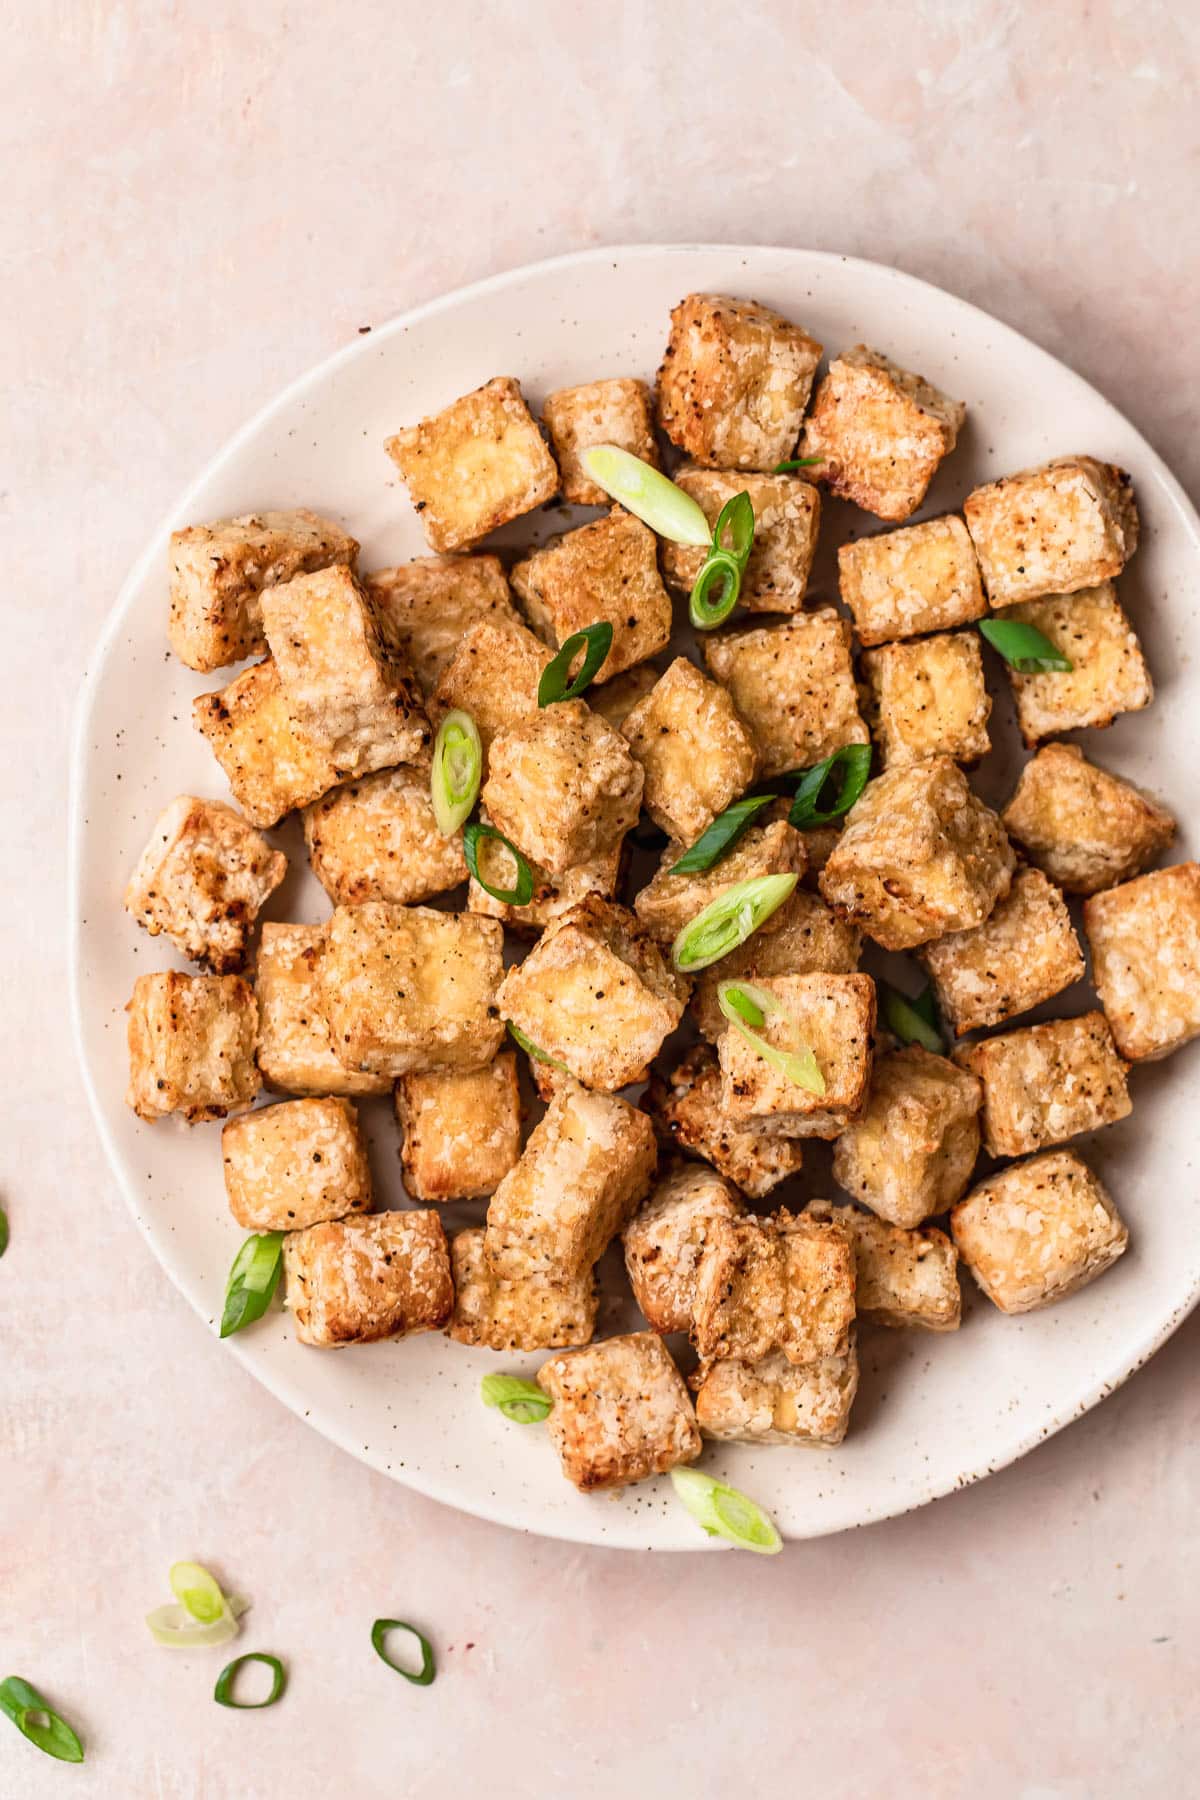 Golden brown salt and pepper tofu cooked in the air fryer, on a white plate, topped with thinly sliced green onions.